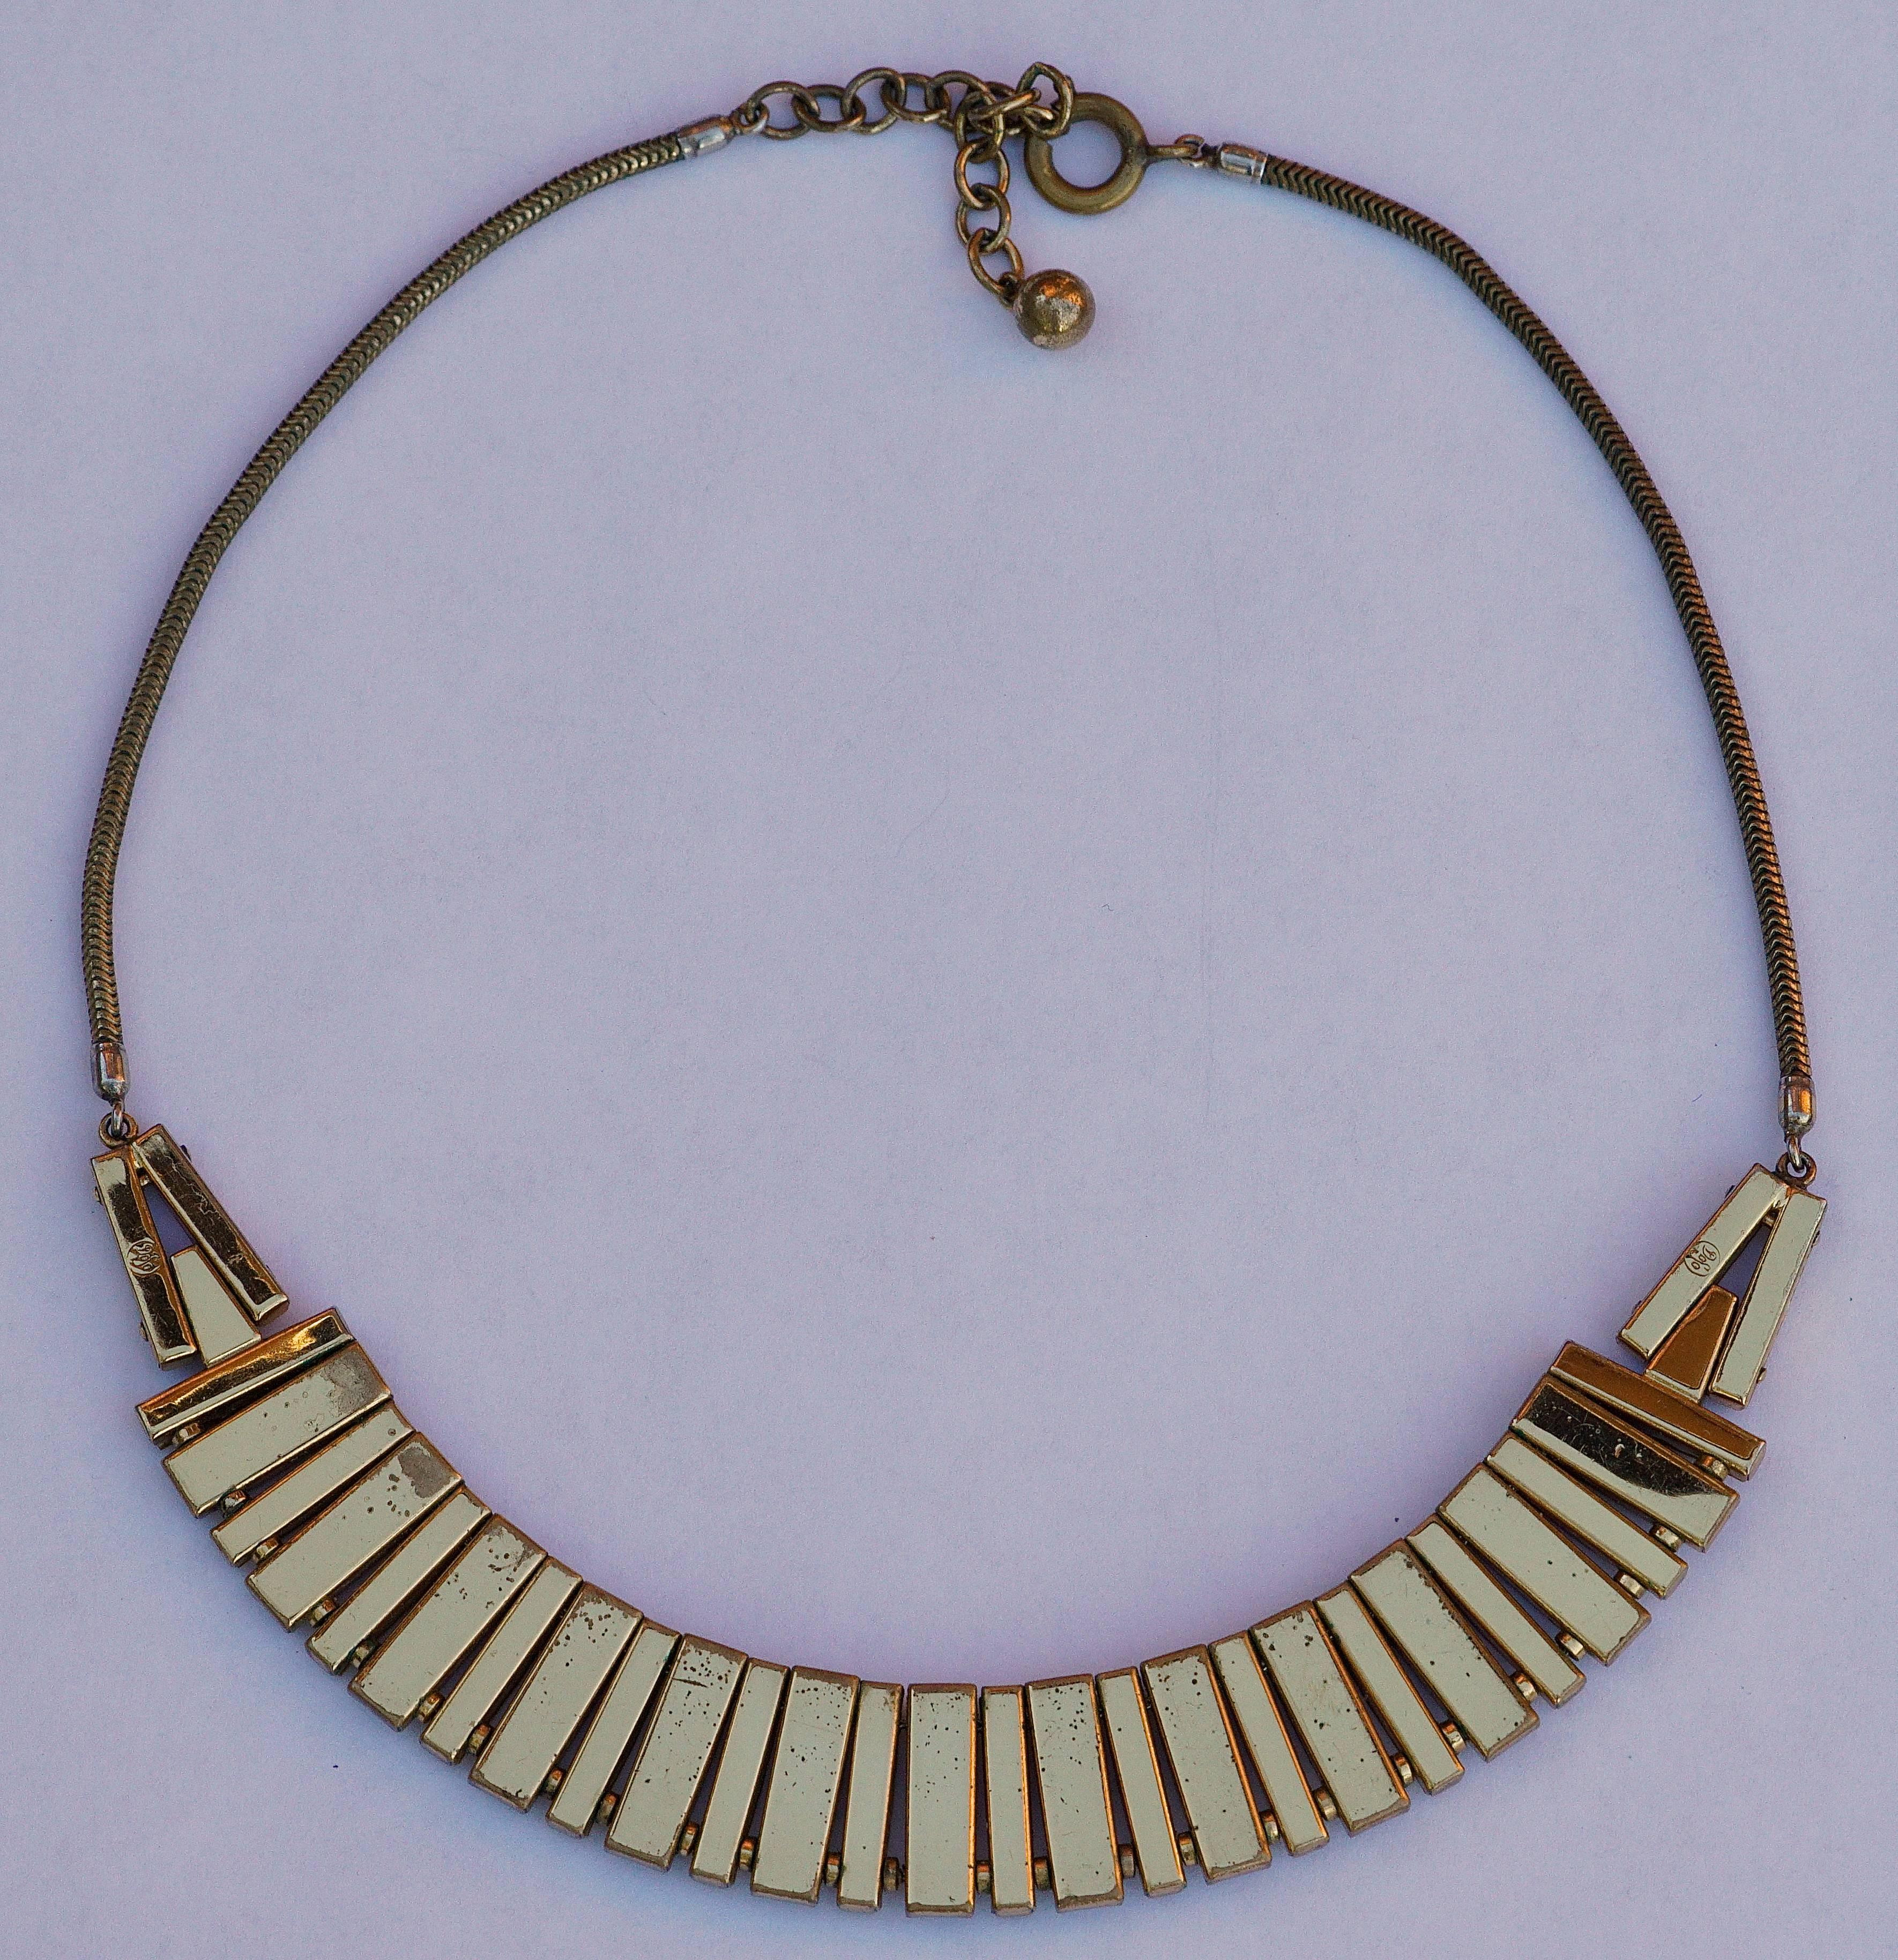 Fabulous gold plated original Art Deco necklace featuring channel set rhinestones and mother of pearl. The rhinestones and mother of pearl are separated by metal beads, to create the curve to go around the neck. The necklace has the German stamp